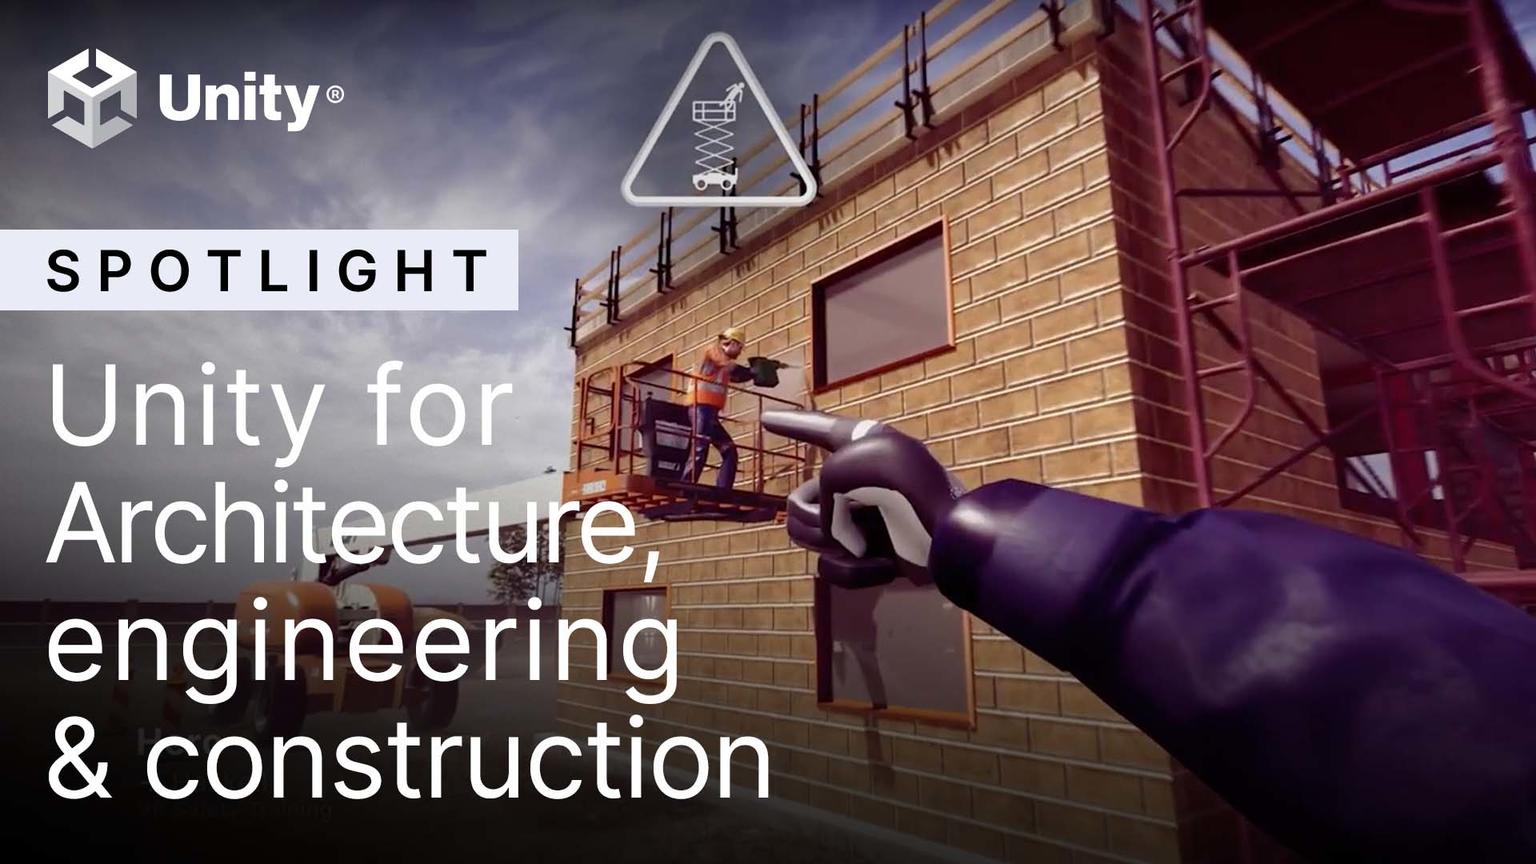 Unity for Architecture, engineering & construction